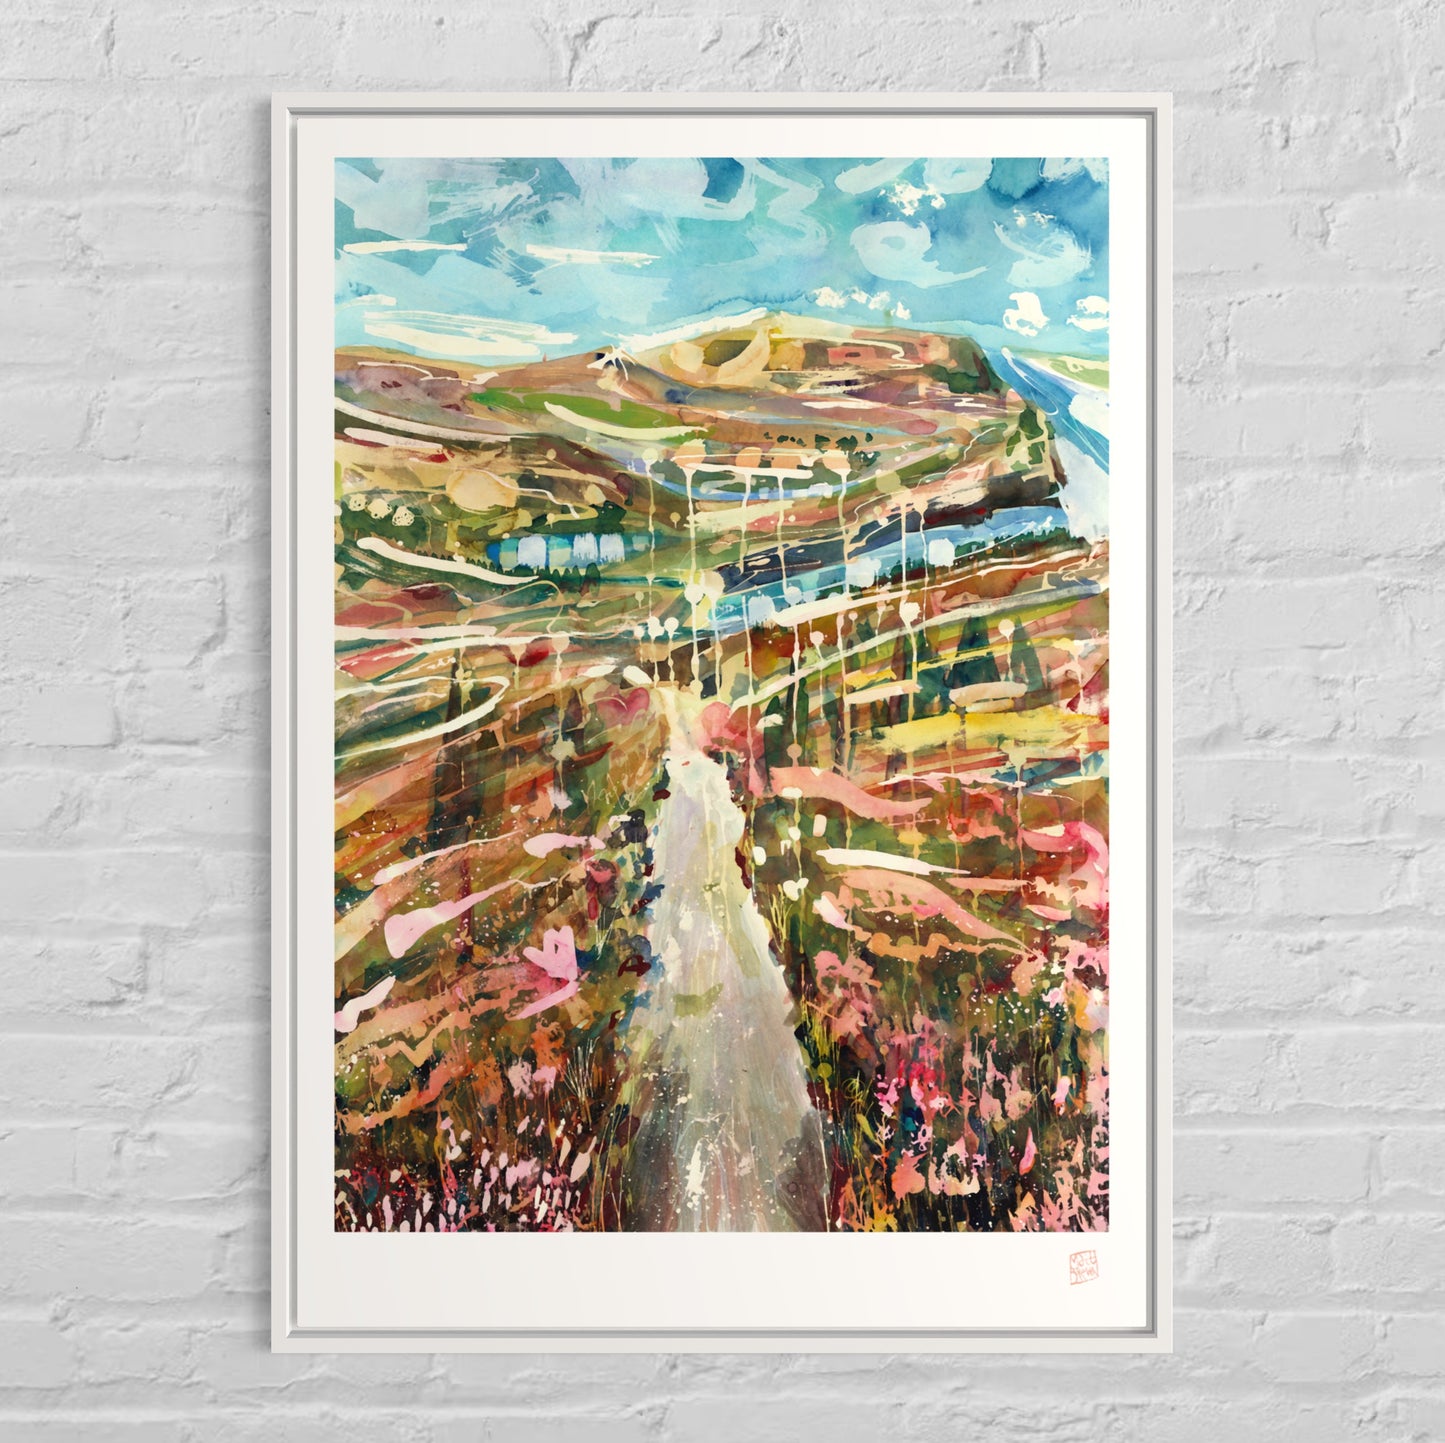 New A1 | A2 Limited Edition Print - The Way is Grateful